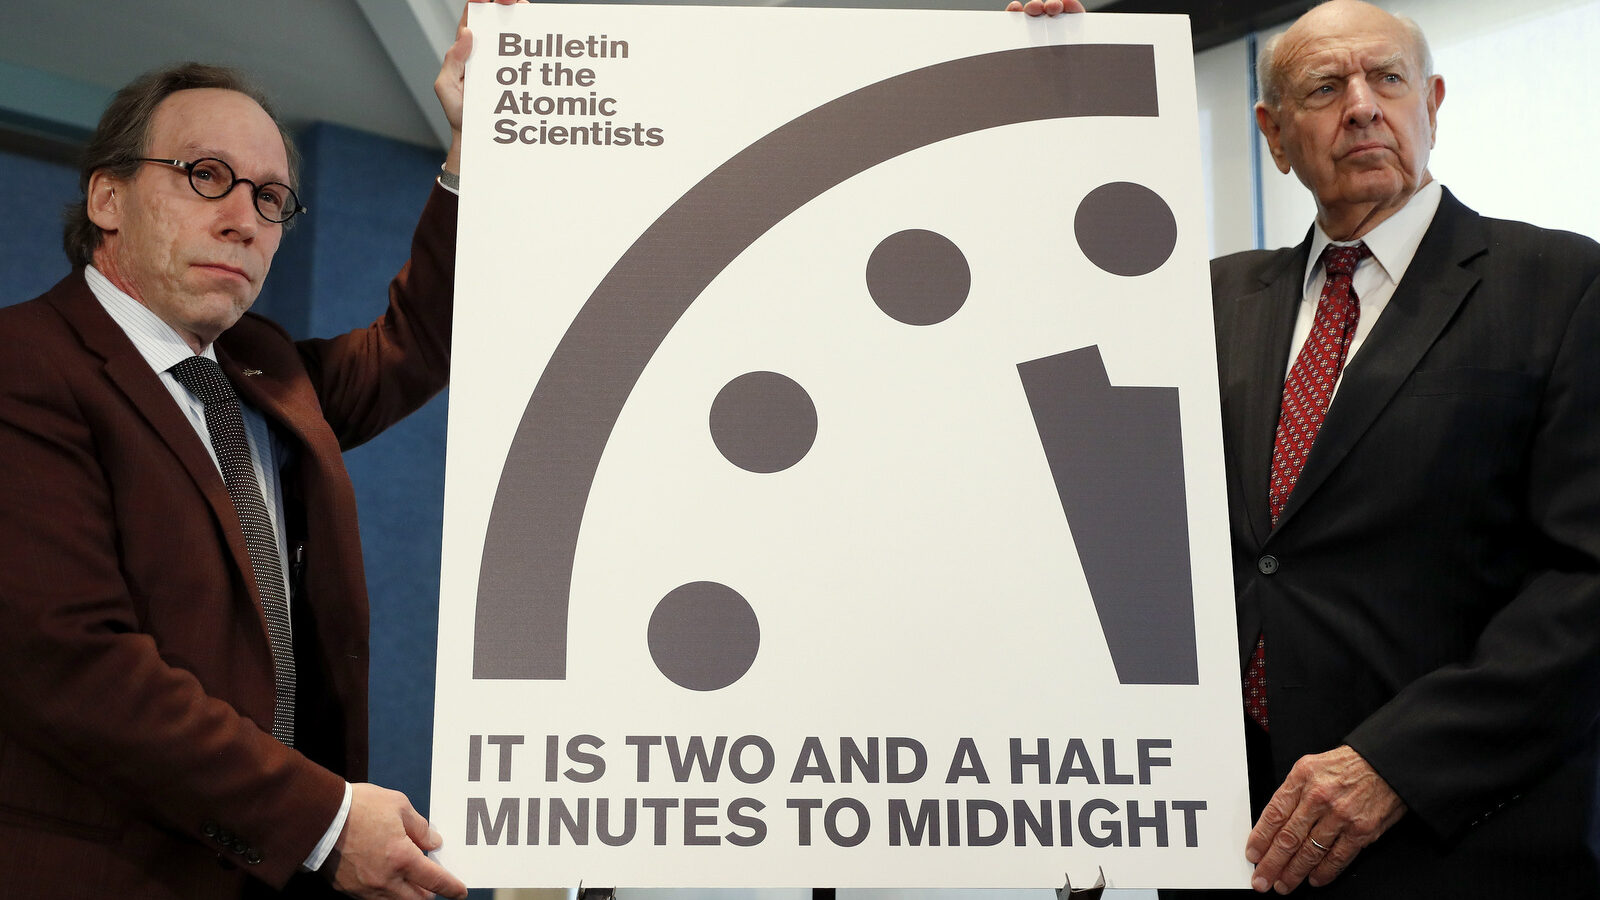 Lawrence Krauss, theoretical physicist, chair of the Bulletin of the Atomic Scientists Board of Sponsors, left, and Thomas Pickering, co-chair of the International Crisis Group, display the Doomsday Clock during a news conference the at the National Press Club in Washington, Thursday, Jan. 26, 2017, announcing that the Bulletin of the Atomic Scientist have moved the minute hand of the Doomsday Clock to two and a half minutes to midnight. (AP Photo/Carolyn Kaster)